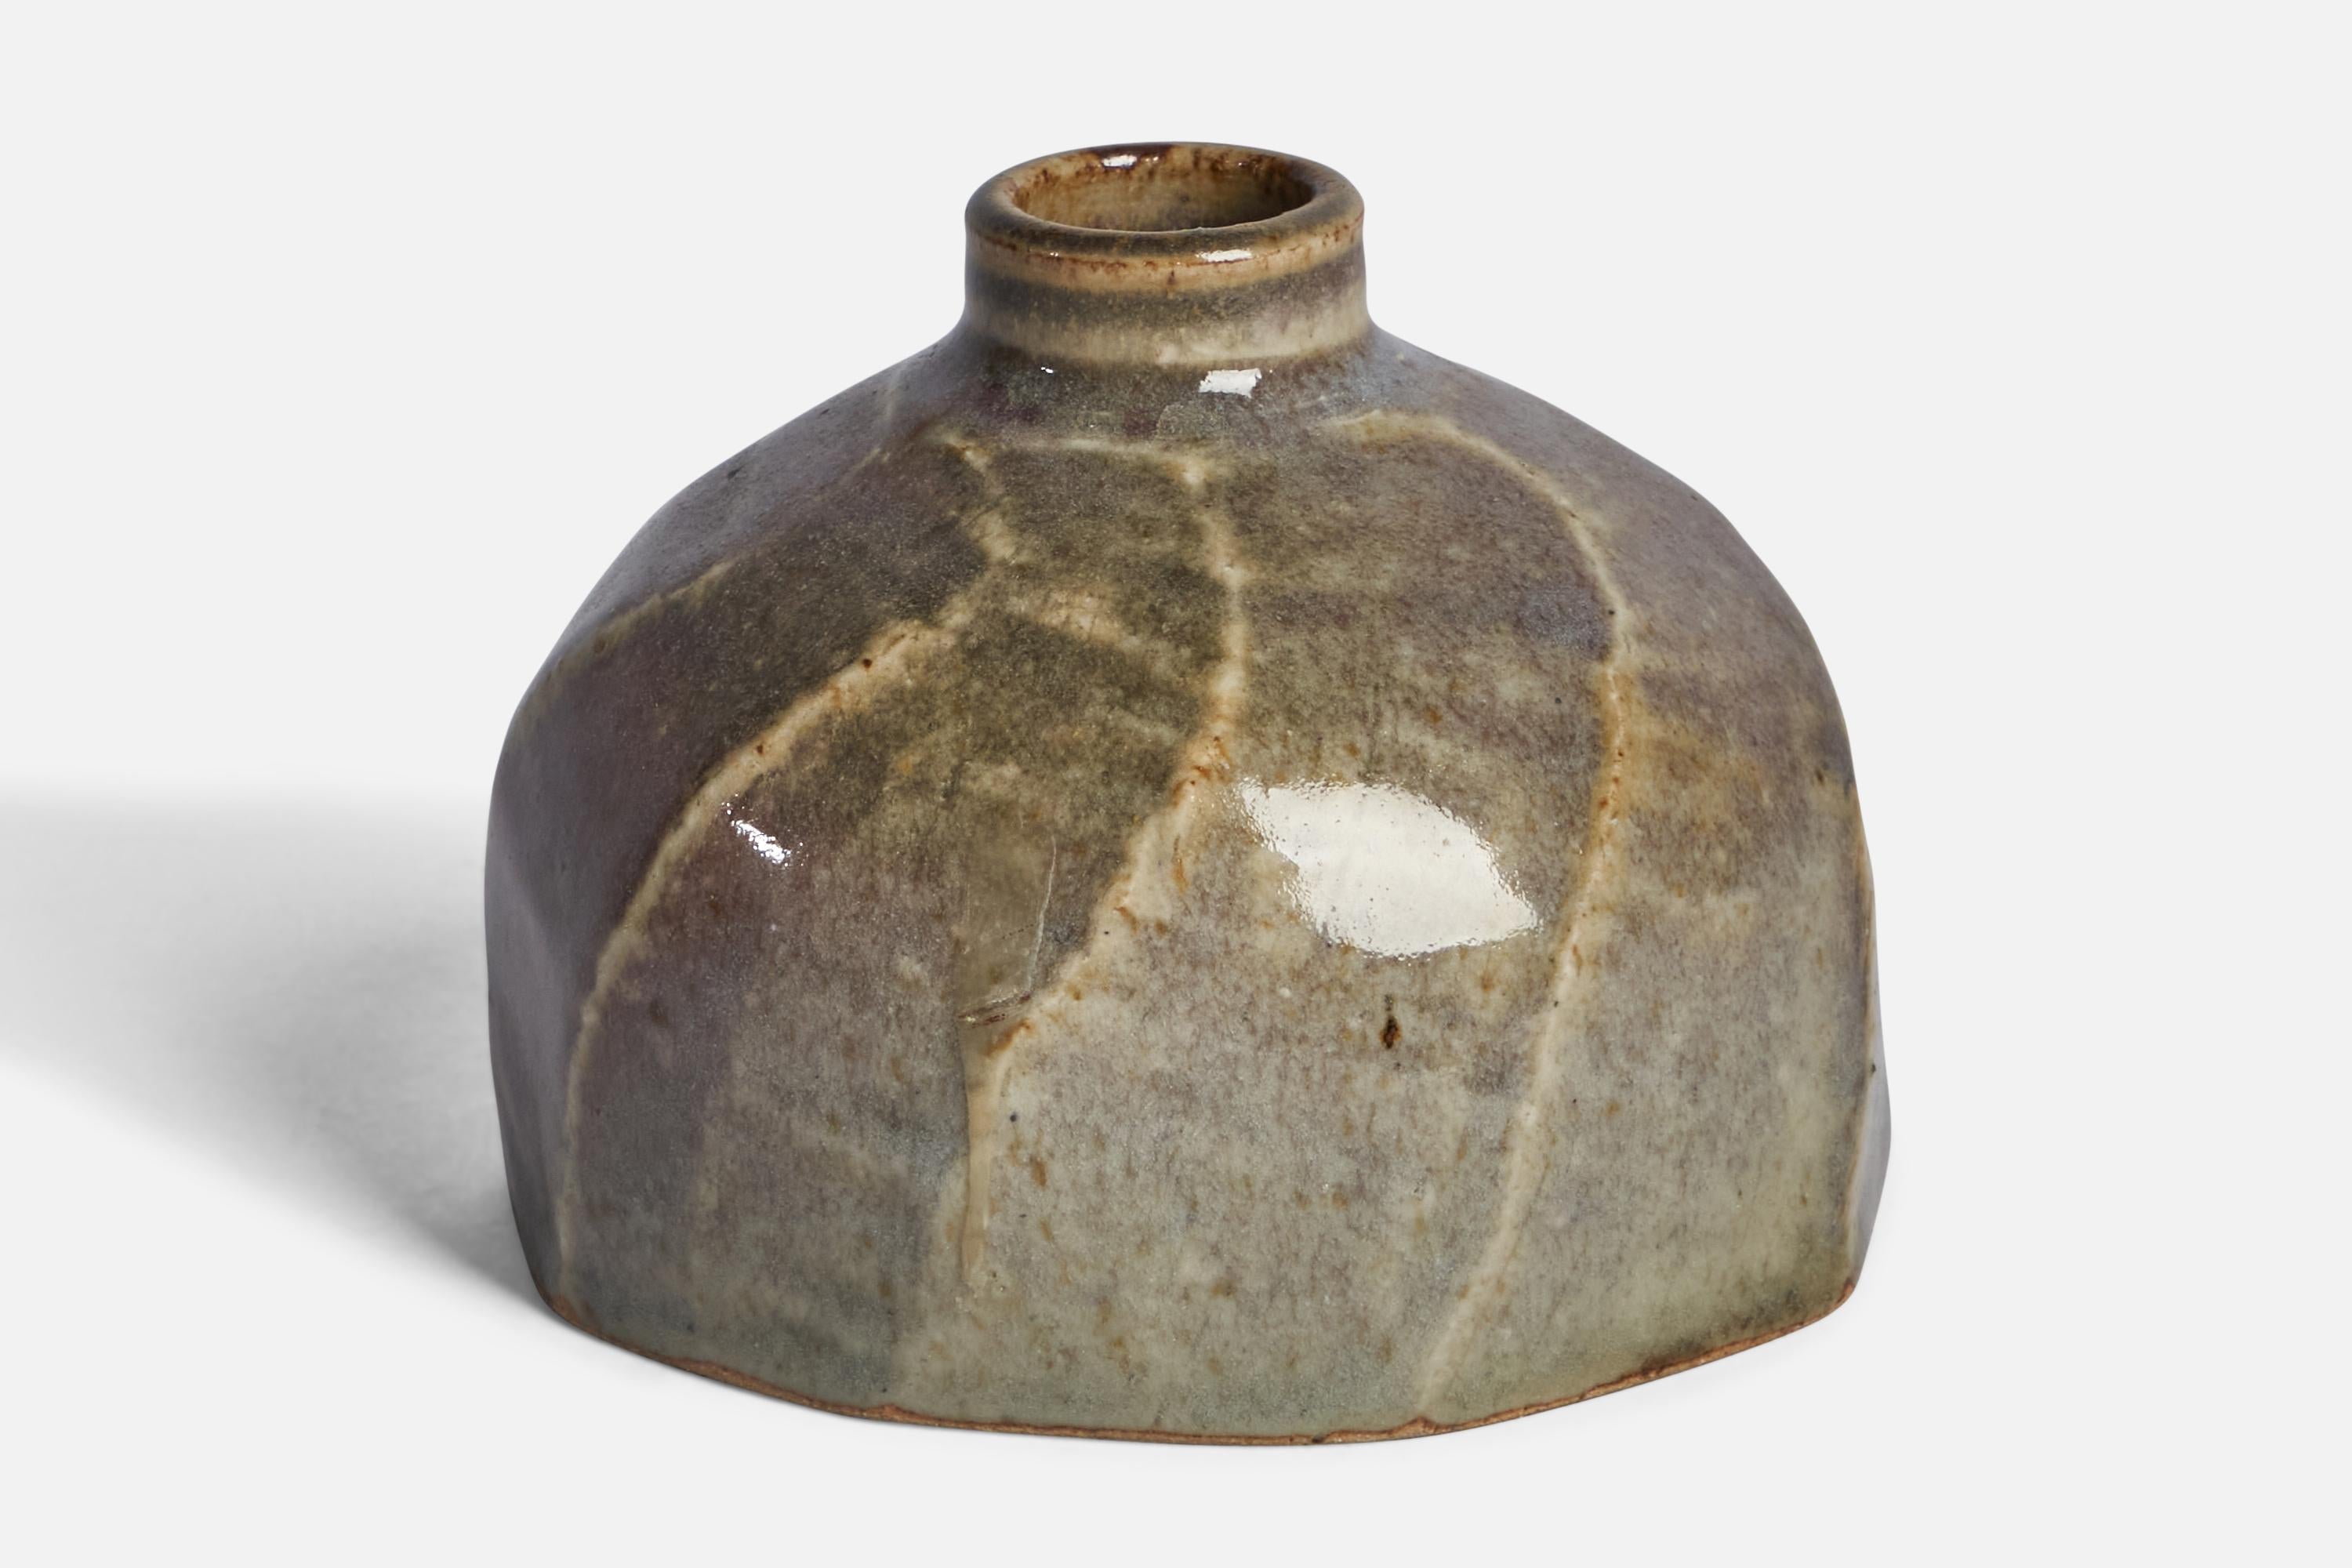 A small grey-glazed stoneware vase designed by Annikki Hovisaari and produced by Arabia, Finland, c. 1950s.

“ARABIA KH” stamp on bottom